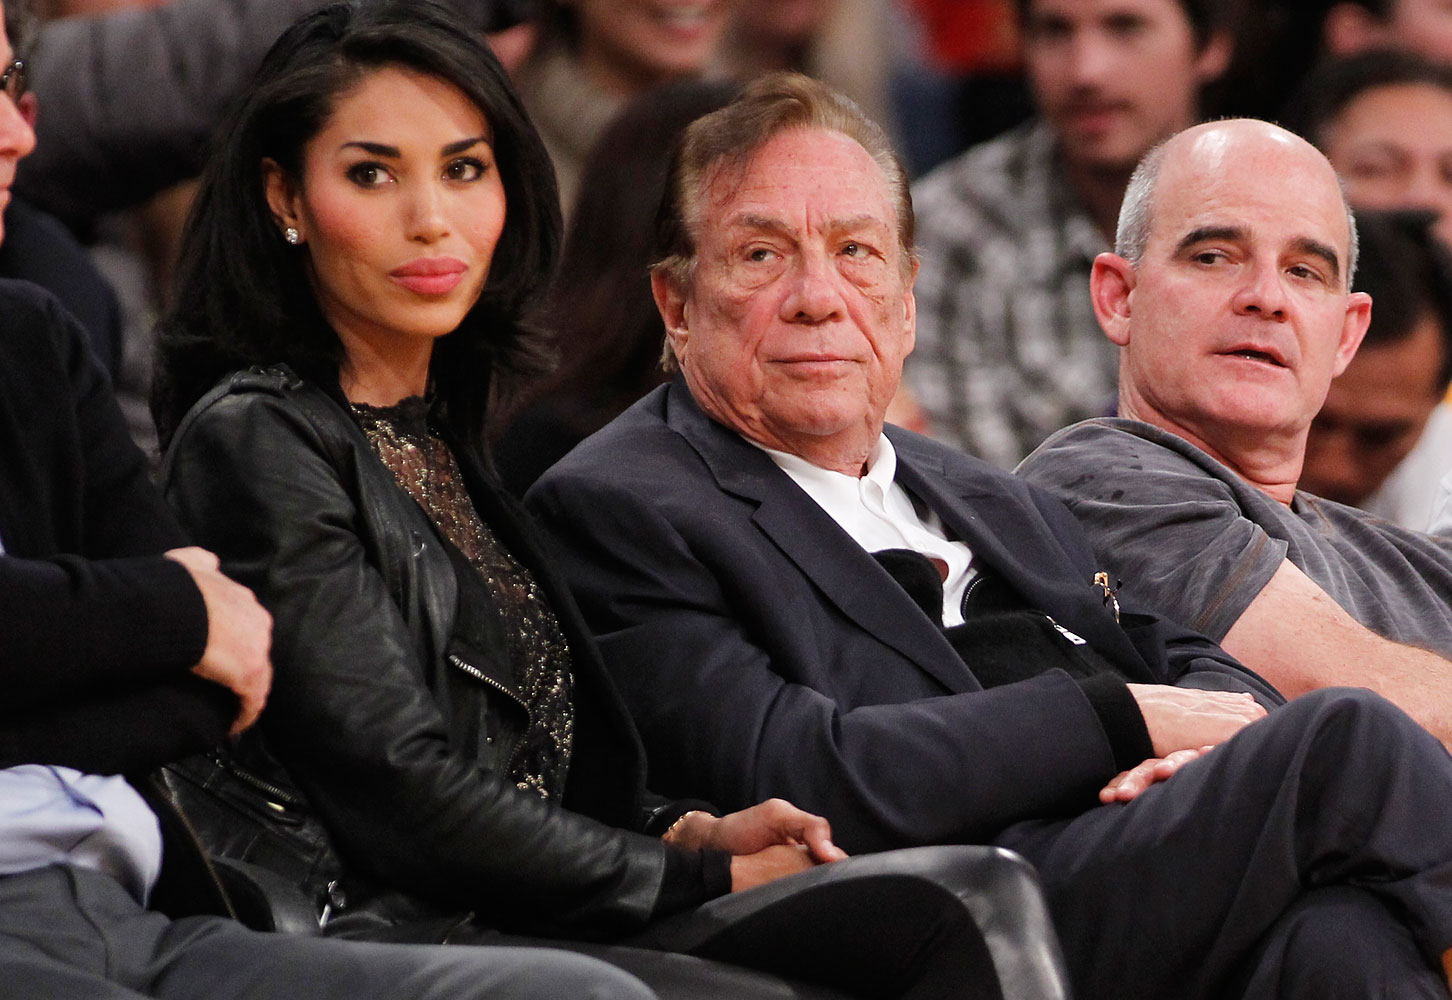 Los Angeles Clippers owner Donald Sterling, center, and V. Stiviano, left, watch the Clippers play the Los Angeles Lakers during an NBA preseason basketball game in Los Angeles, Dec. 19, 2010. (Danny Moloshok—AP)